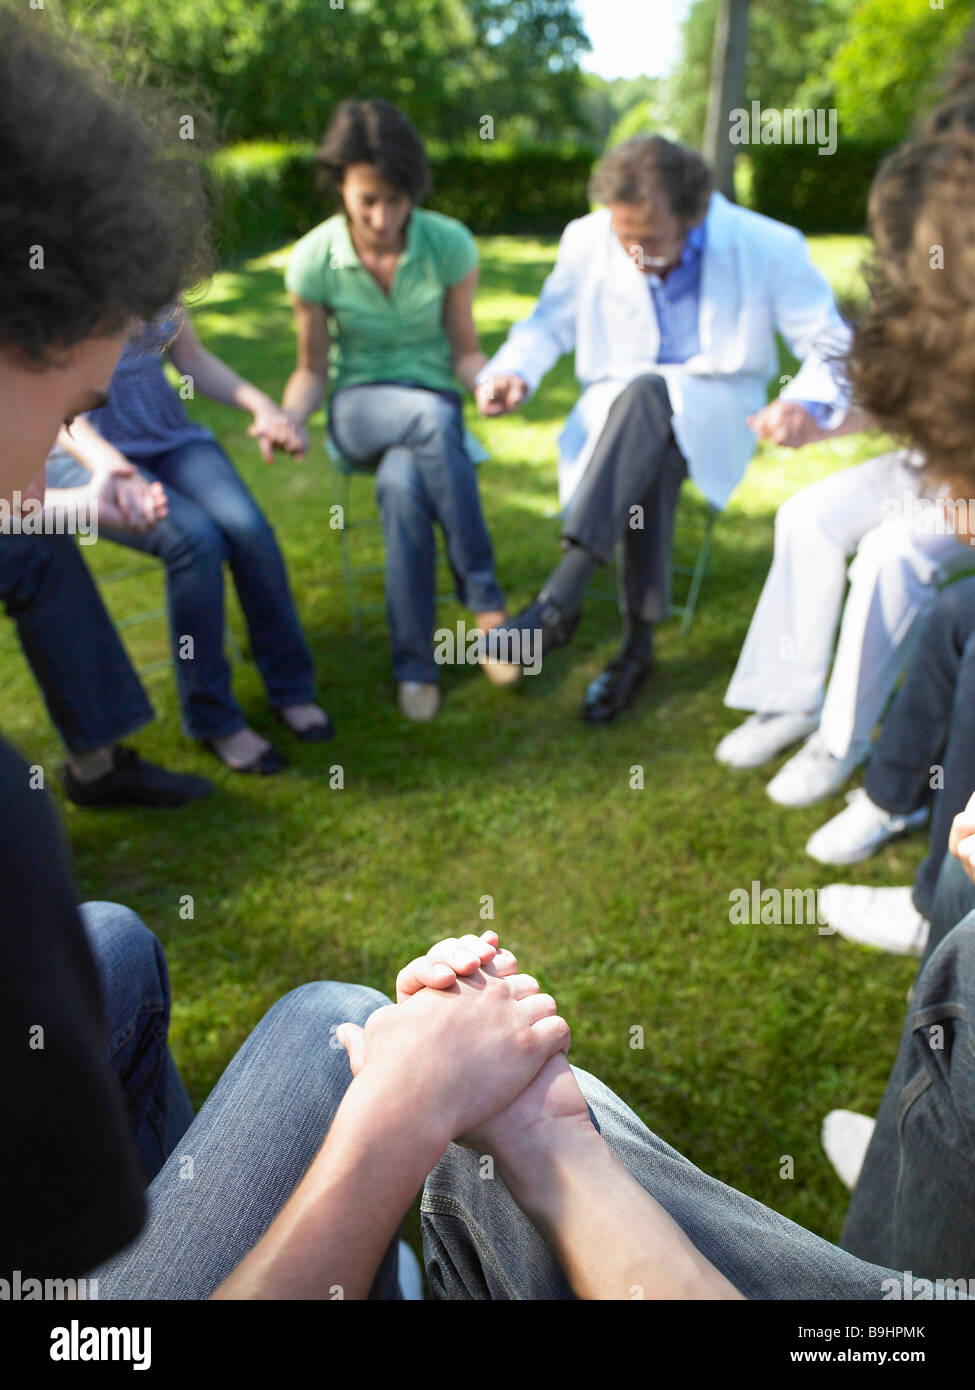 Circle of people in rehab, holding hands Stock Photo